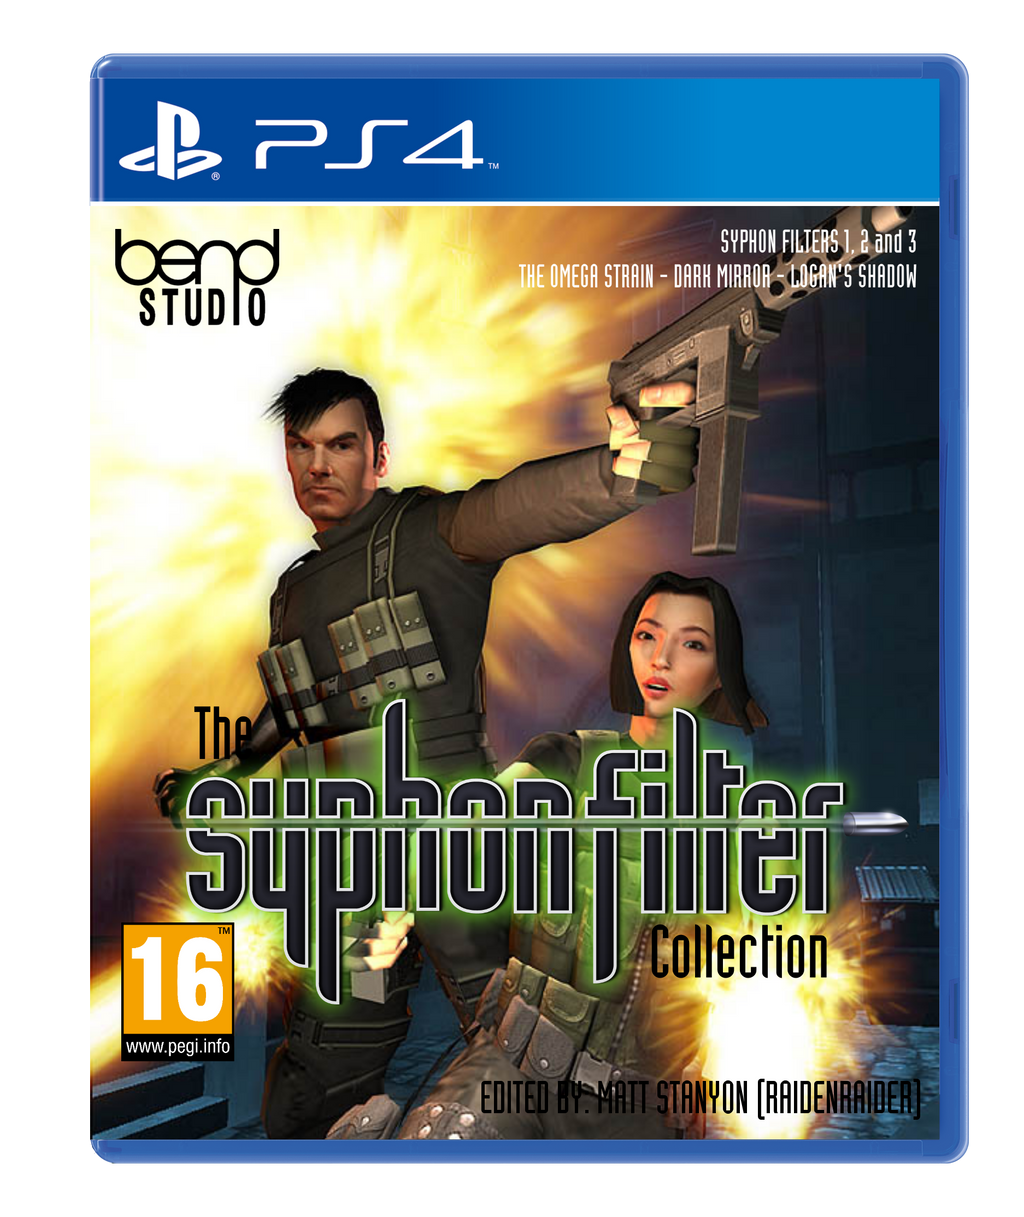 Syphon Filter 3 (9/11) - PS1 Long Box Cover by RaidenRaider on DeviantArt